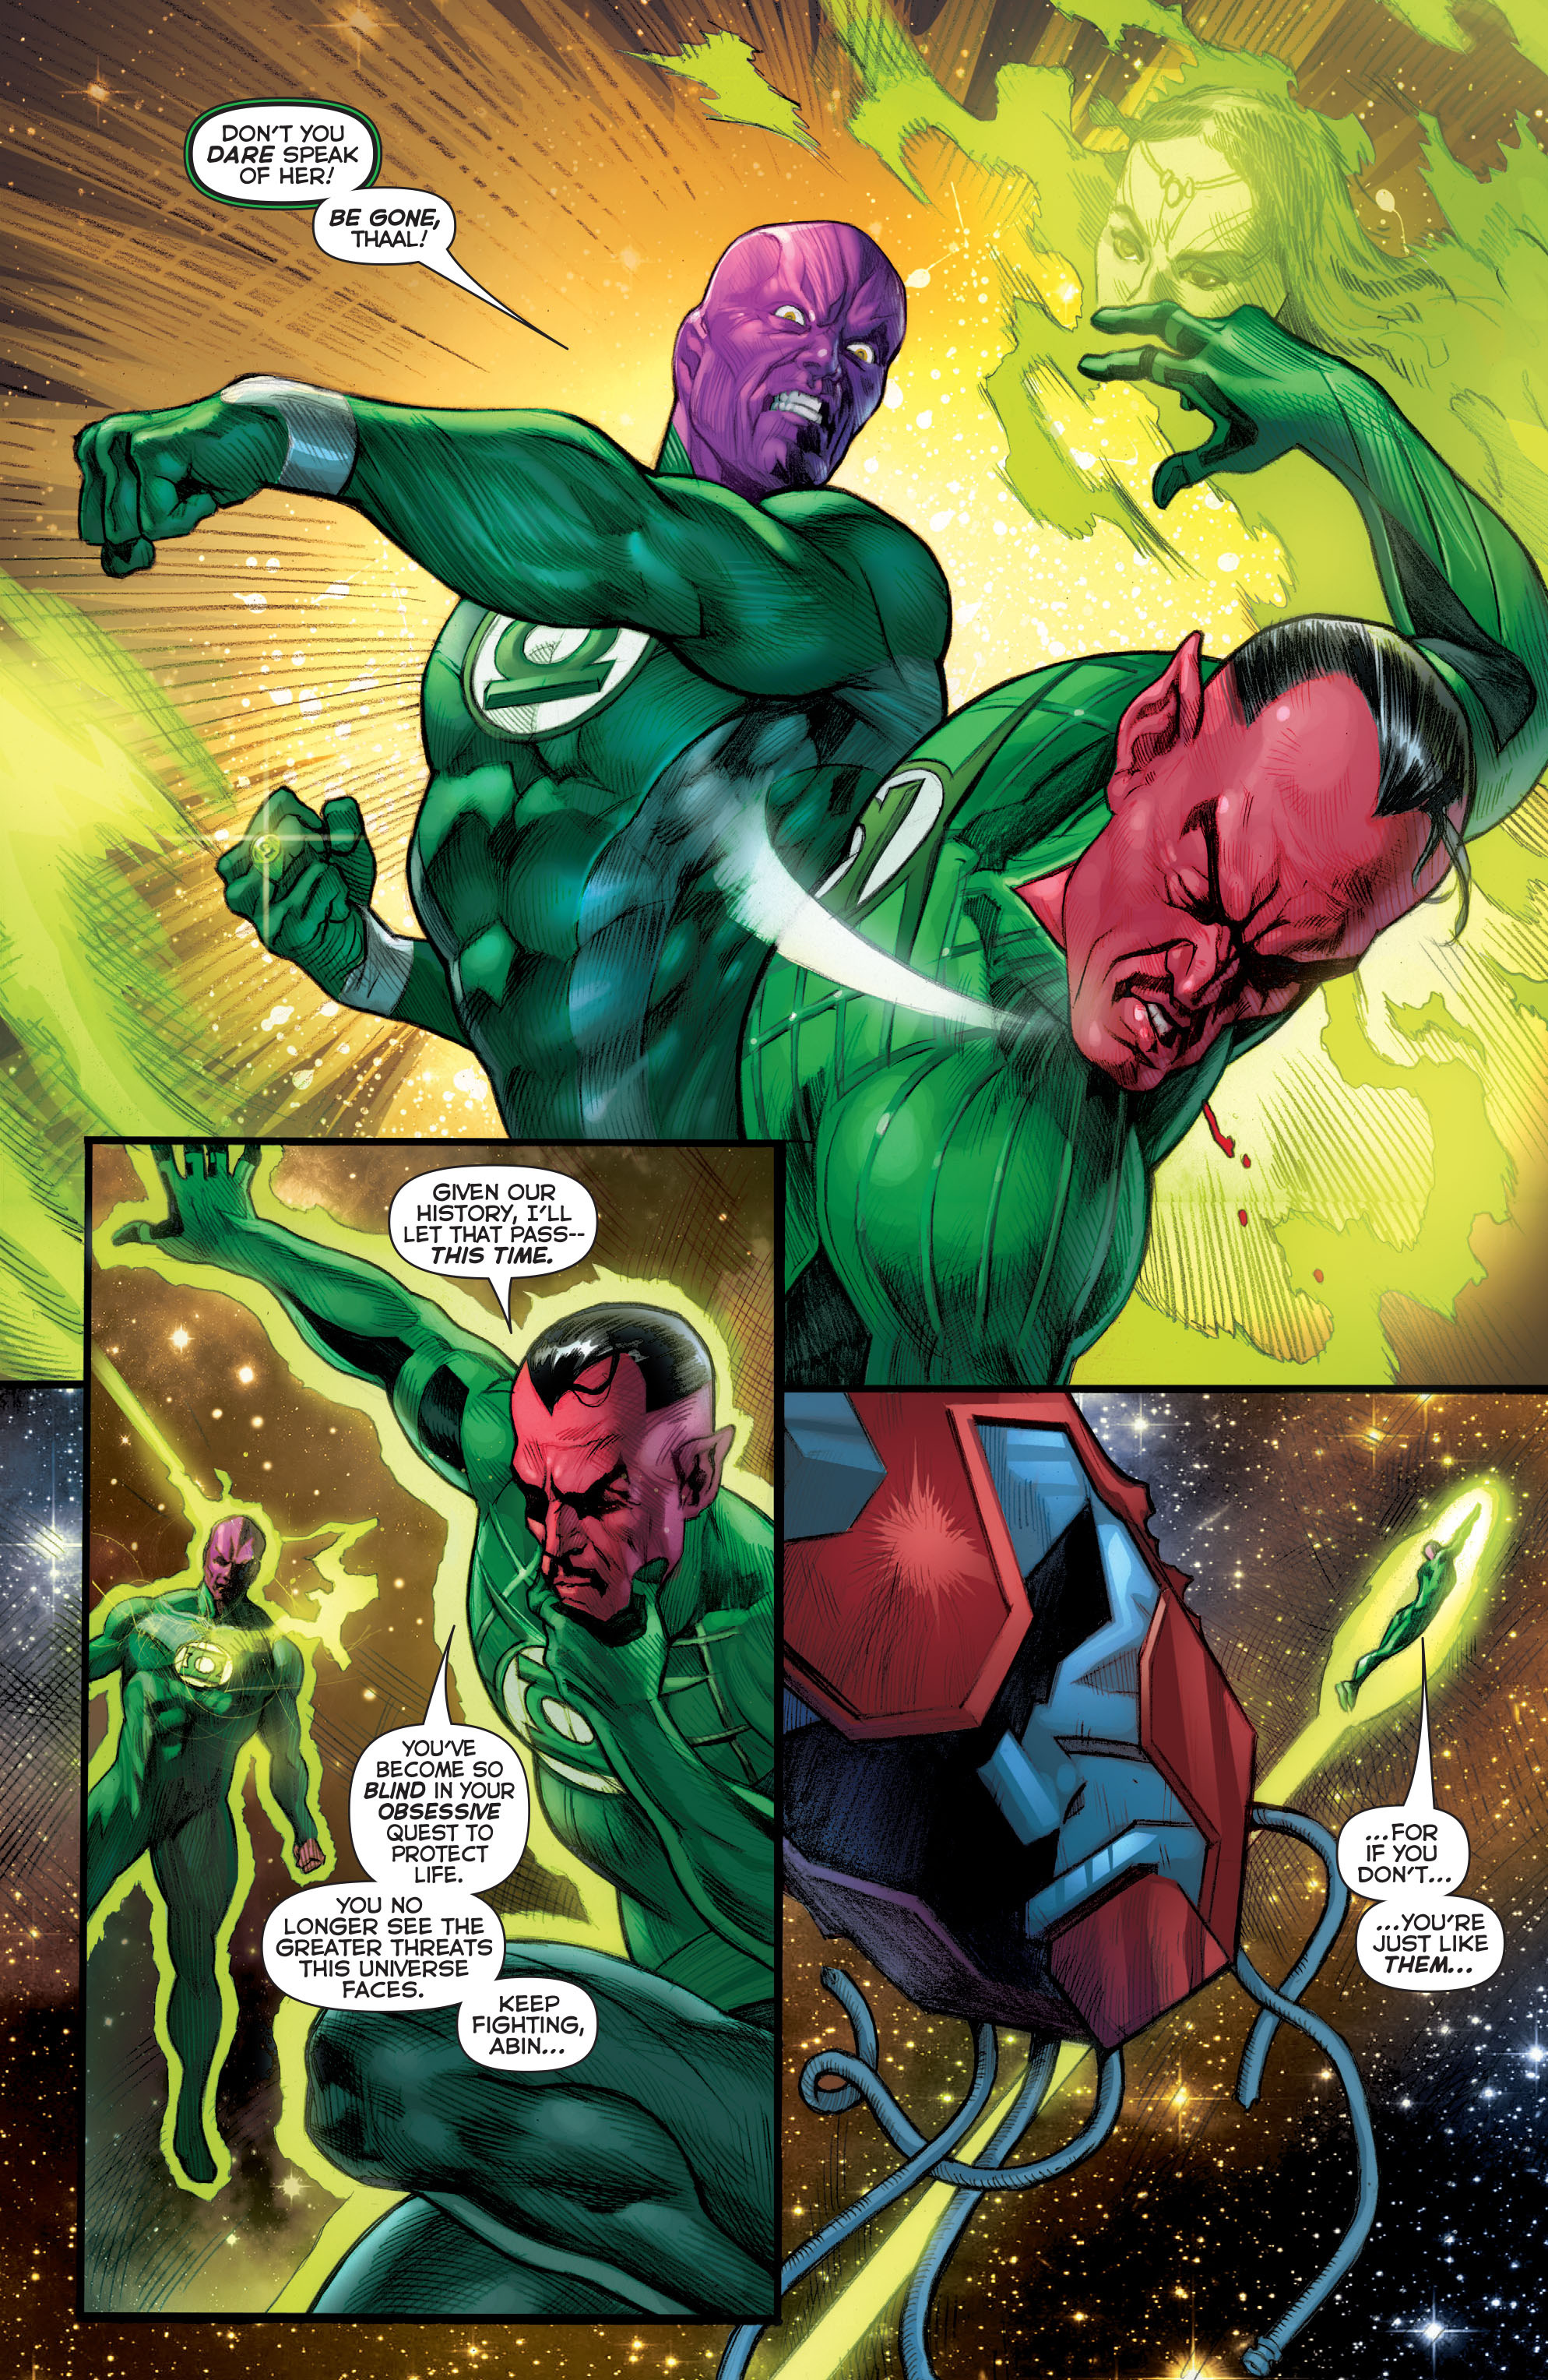 Flashpoint The World Of Flashpoint Featuring Green Lantern